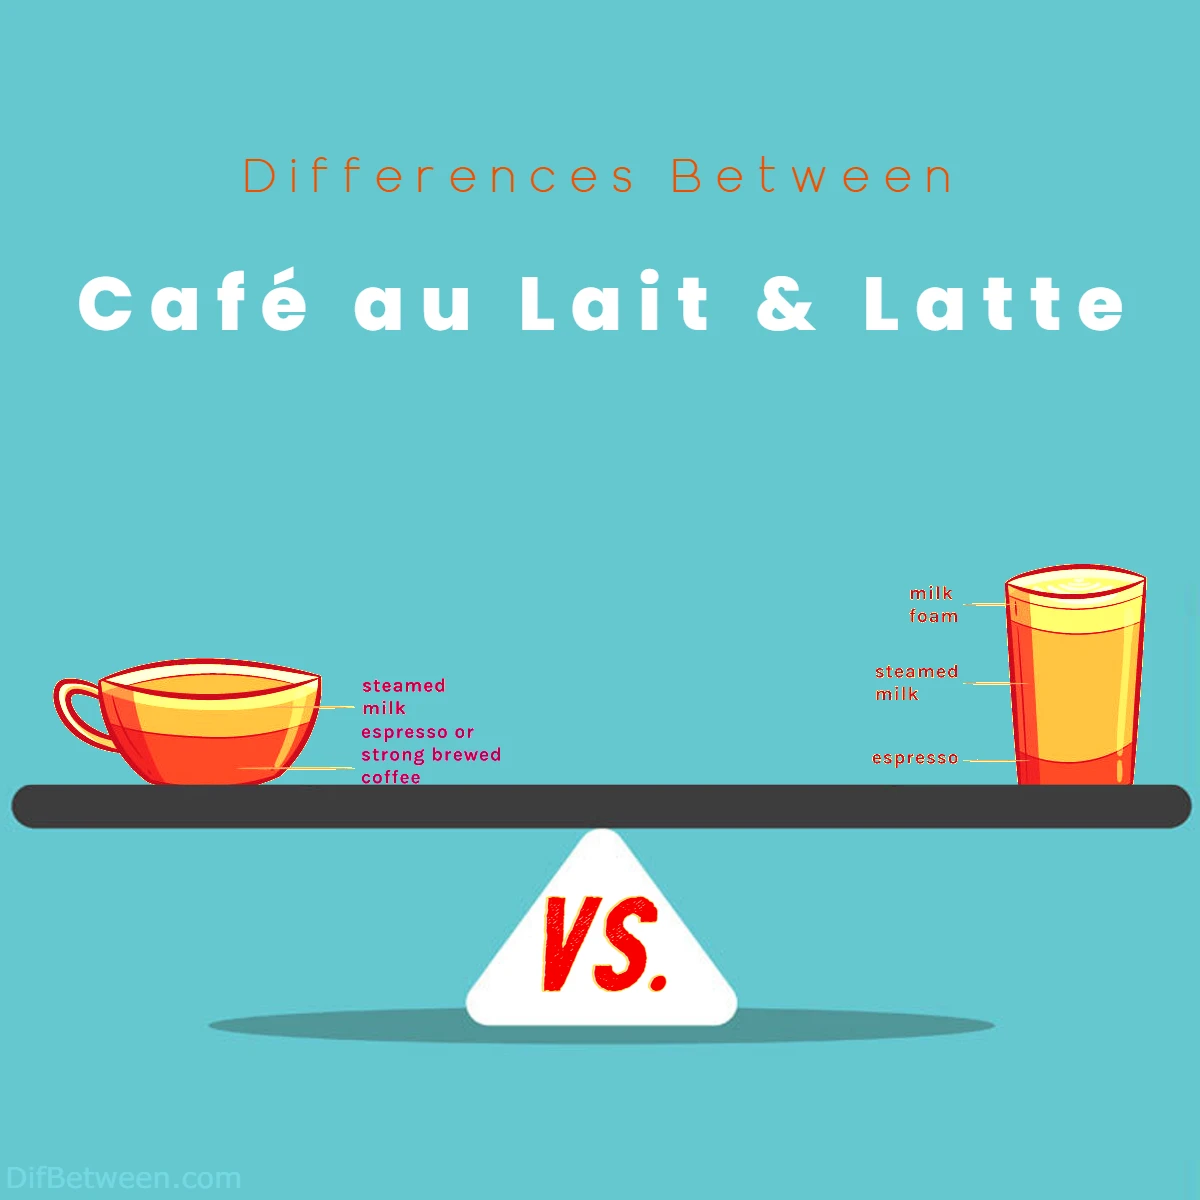 Differences Between Latte and Cafe au Lait